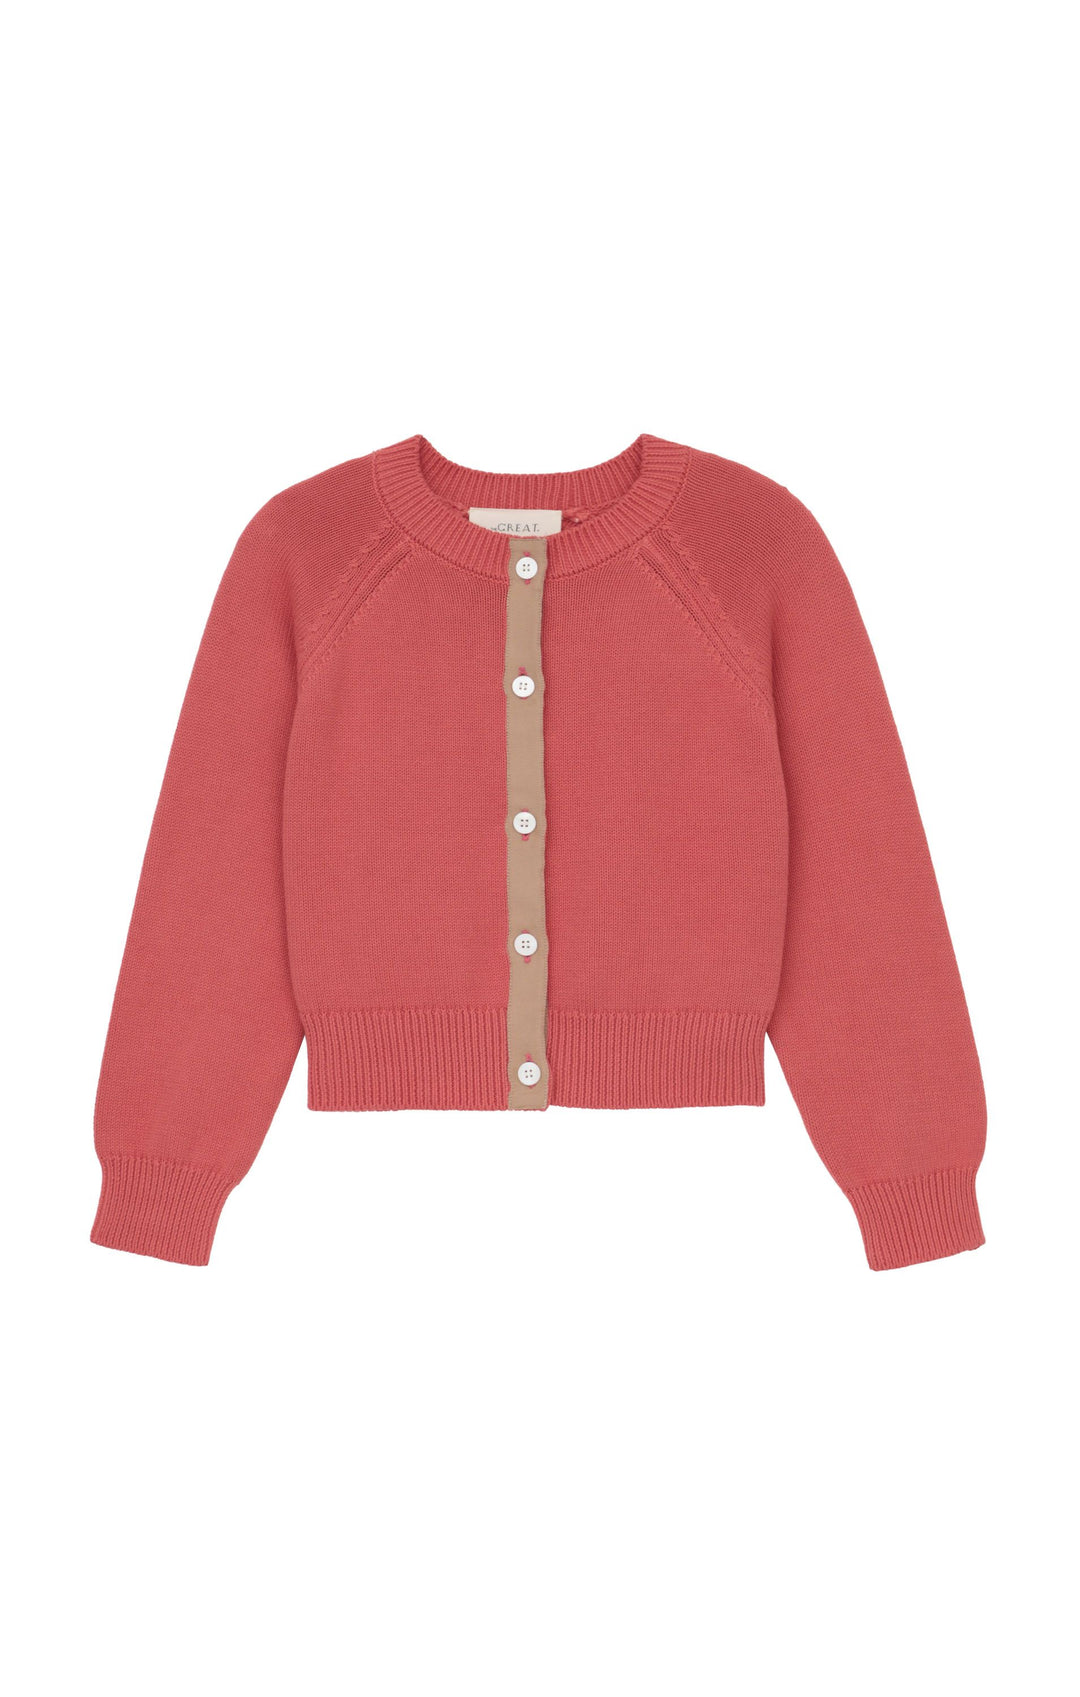 The Great - The Tiny Cardigan in Guava